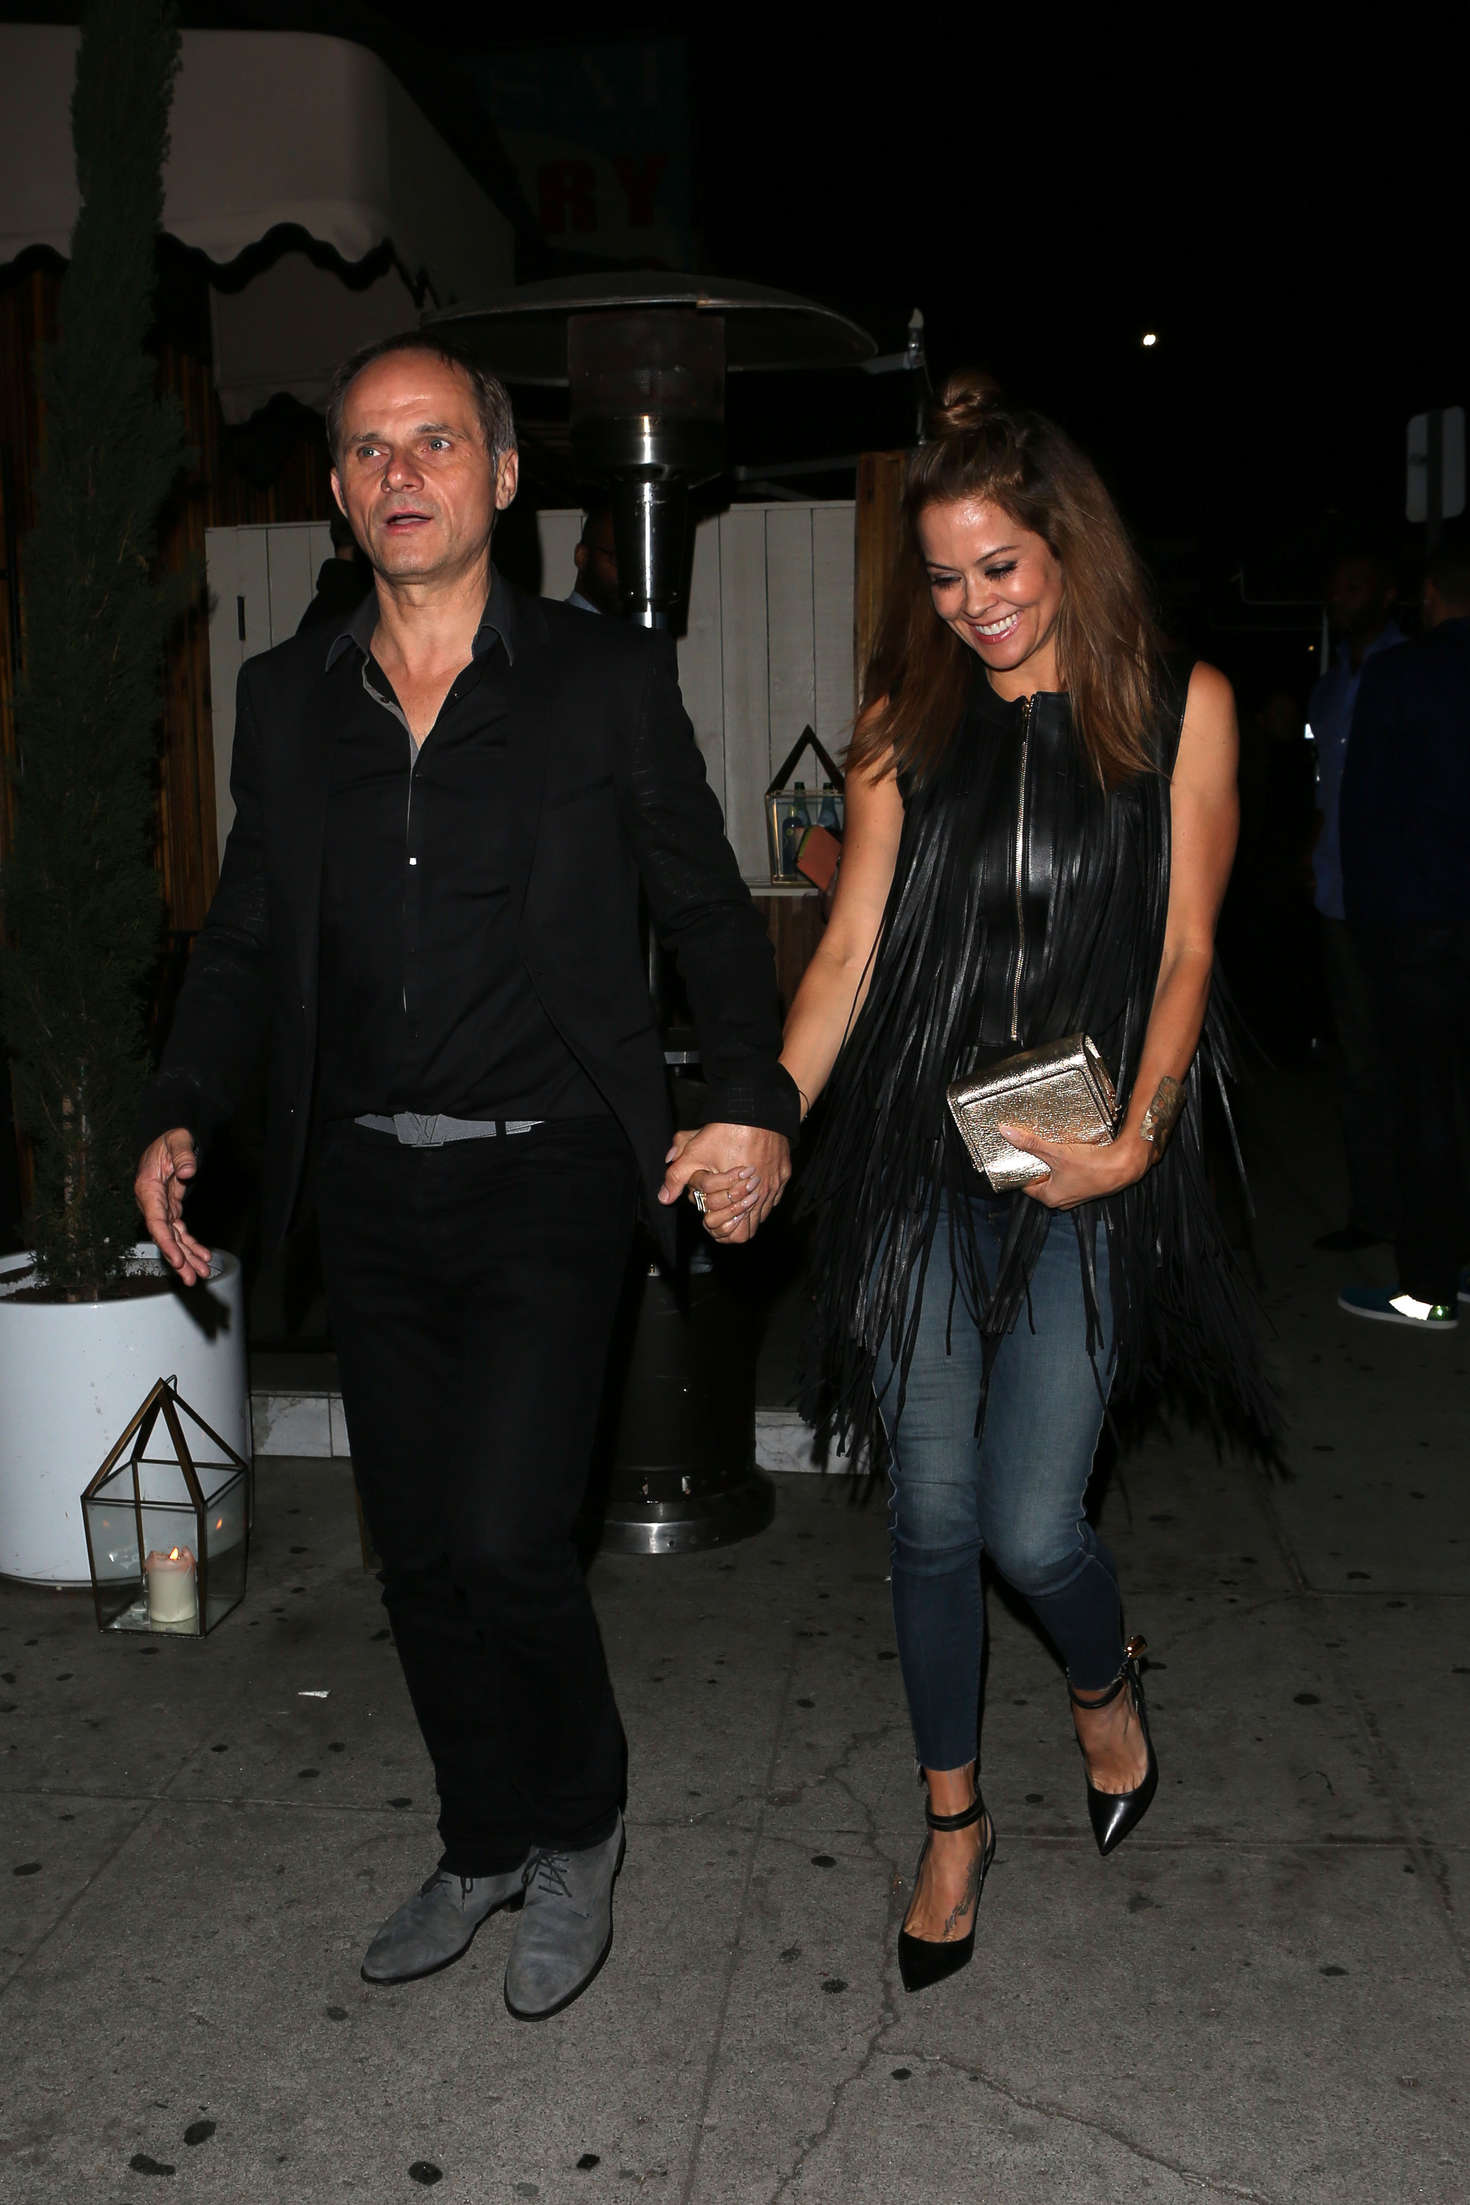 Brooke Burke out at The Nice Guy nightclub